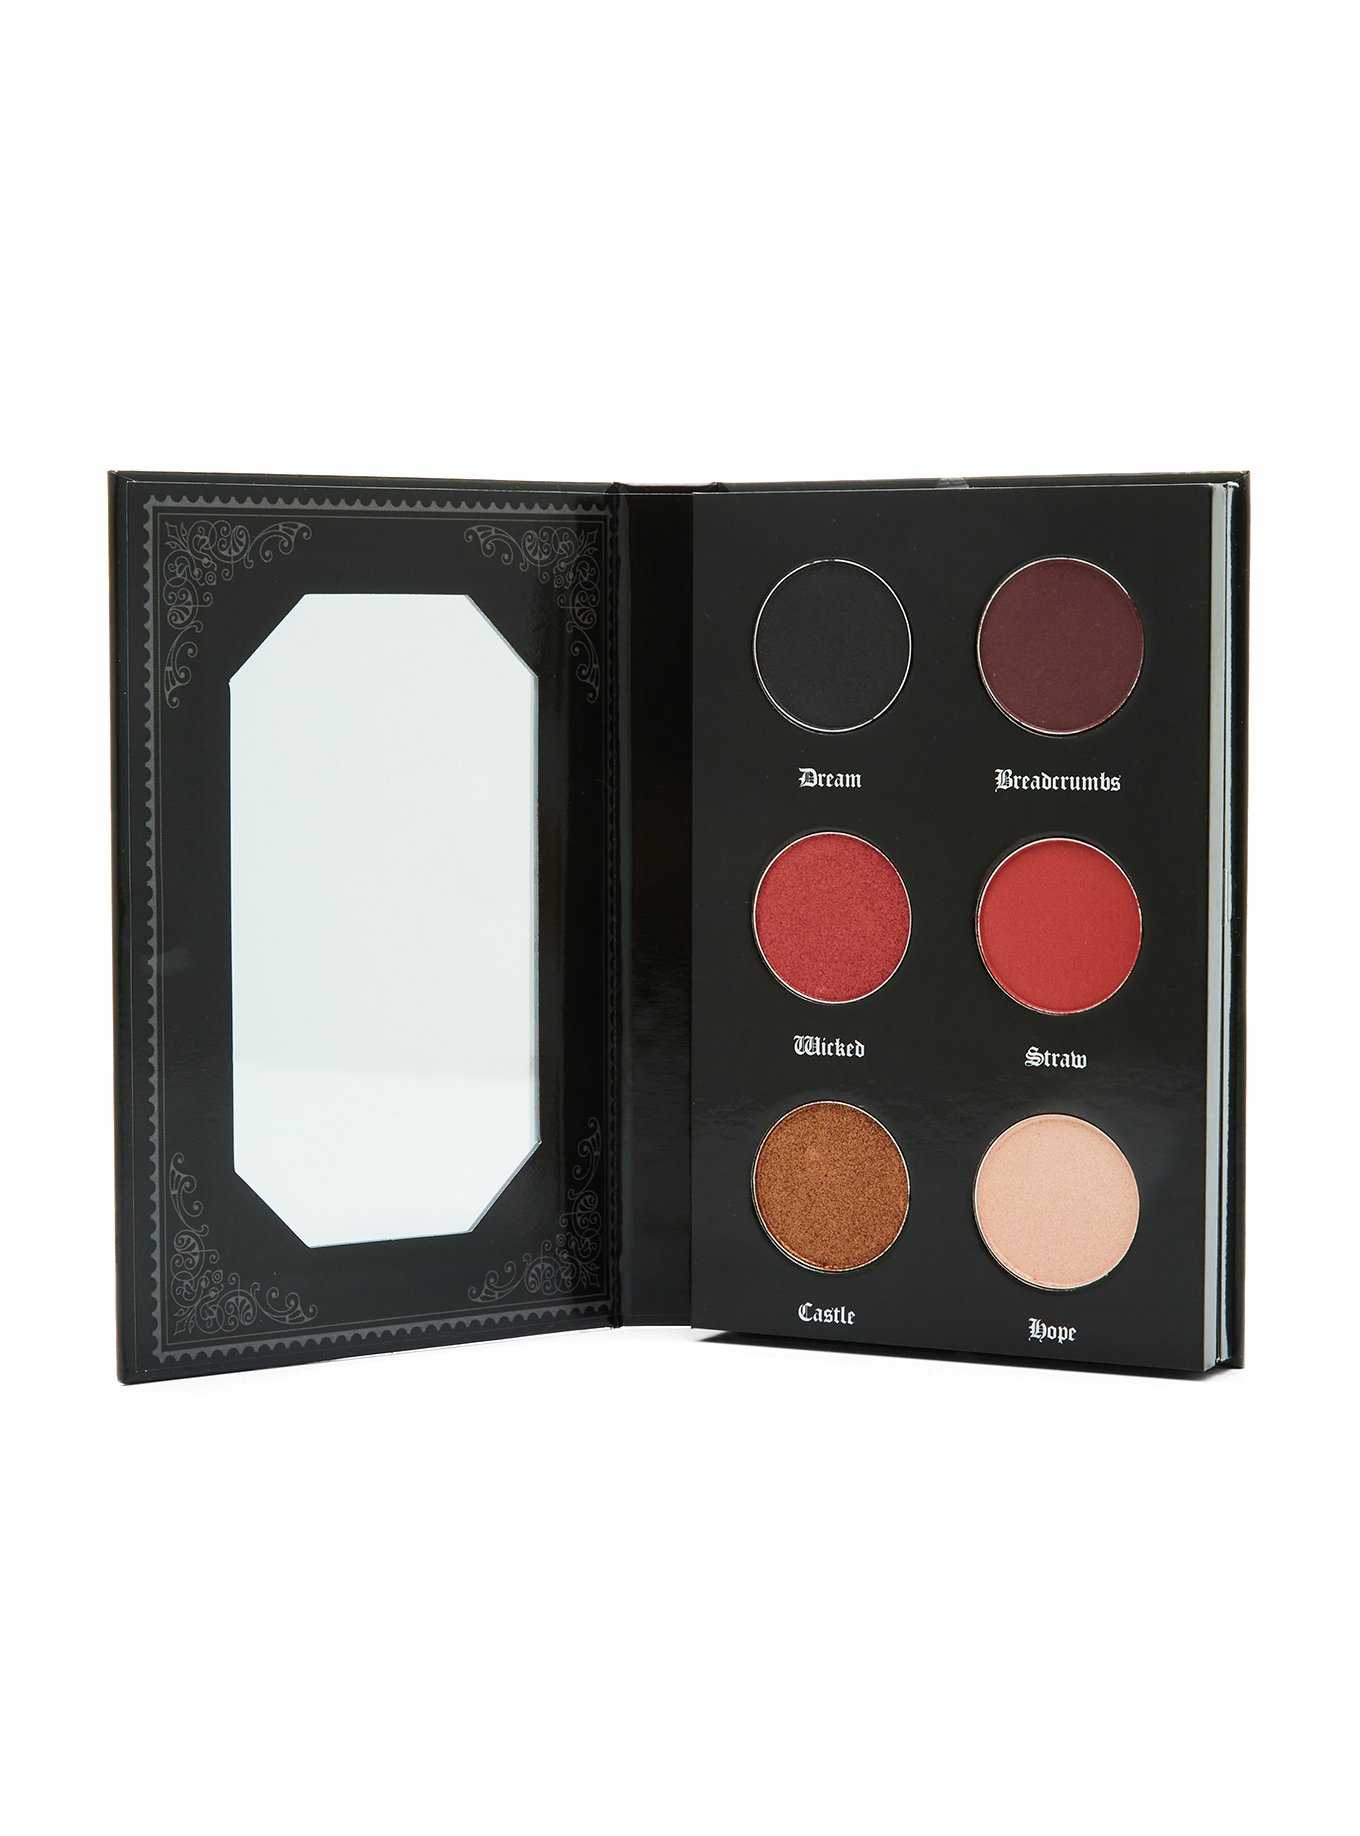 Brothers Grimm Fairy Tales Eyeshadow & Highlighter Palette, , hi-res